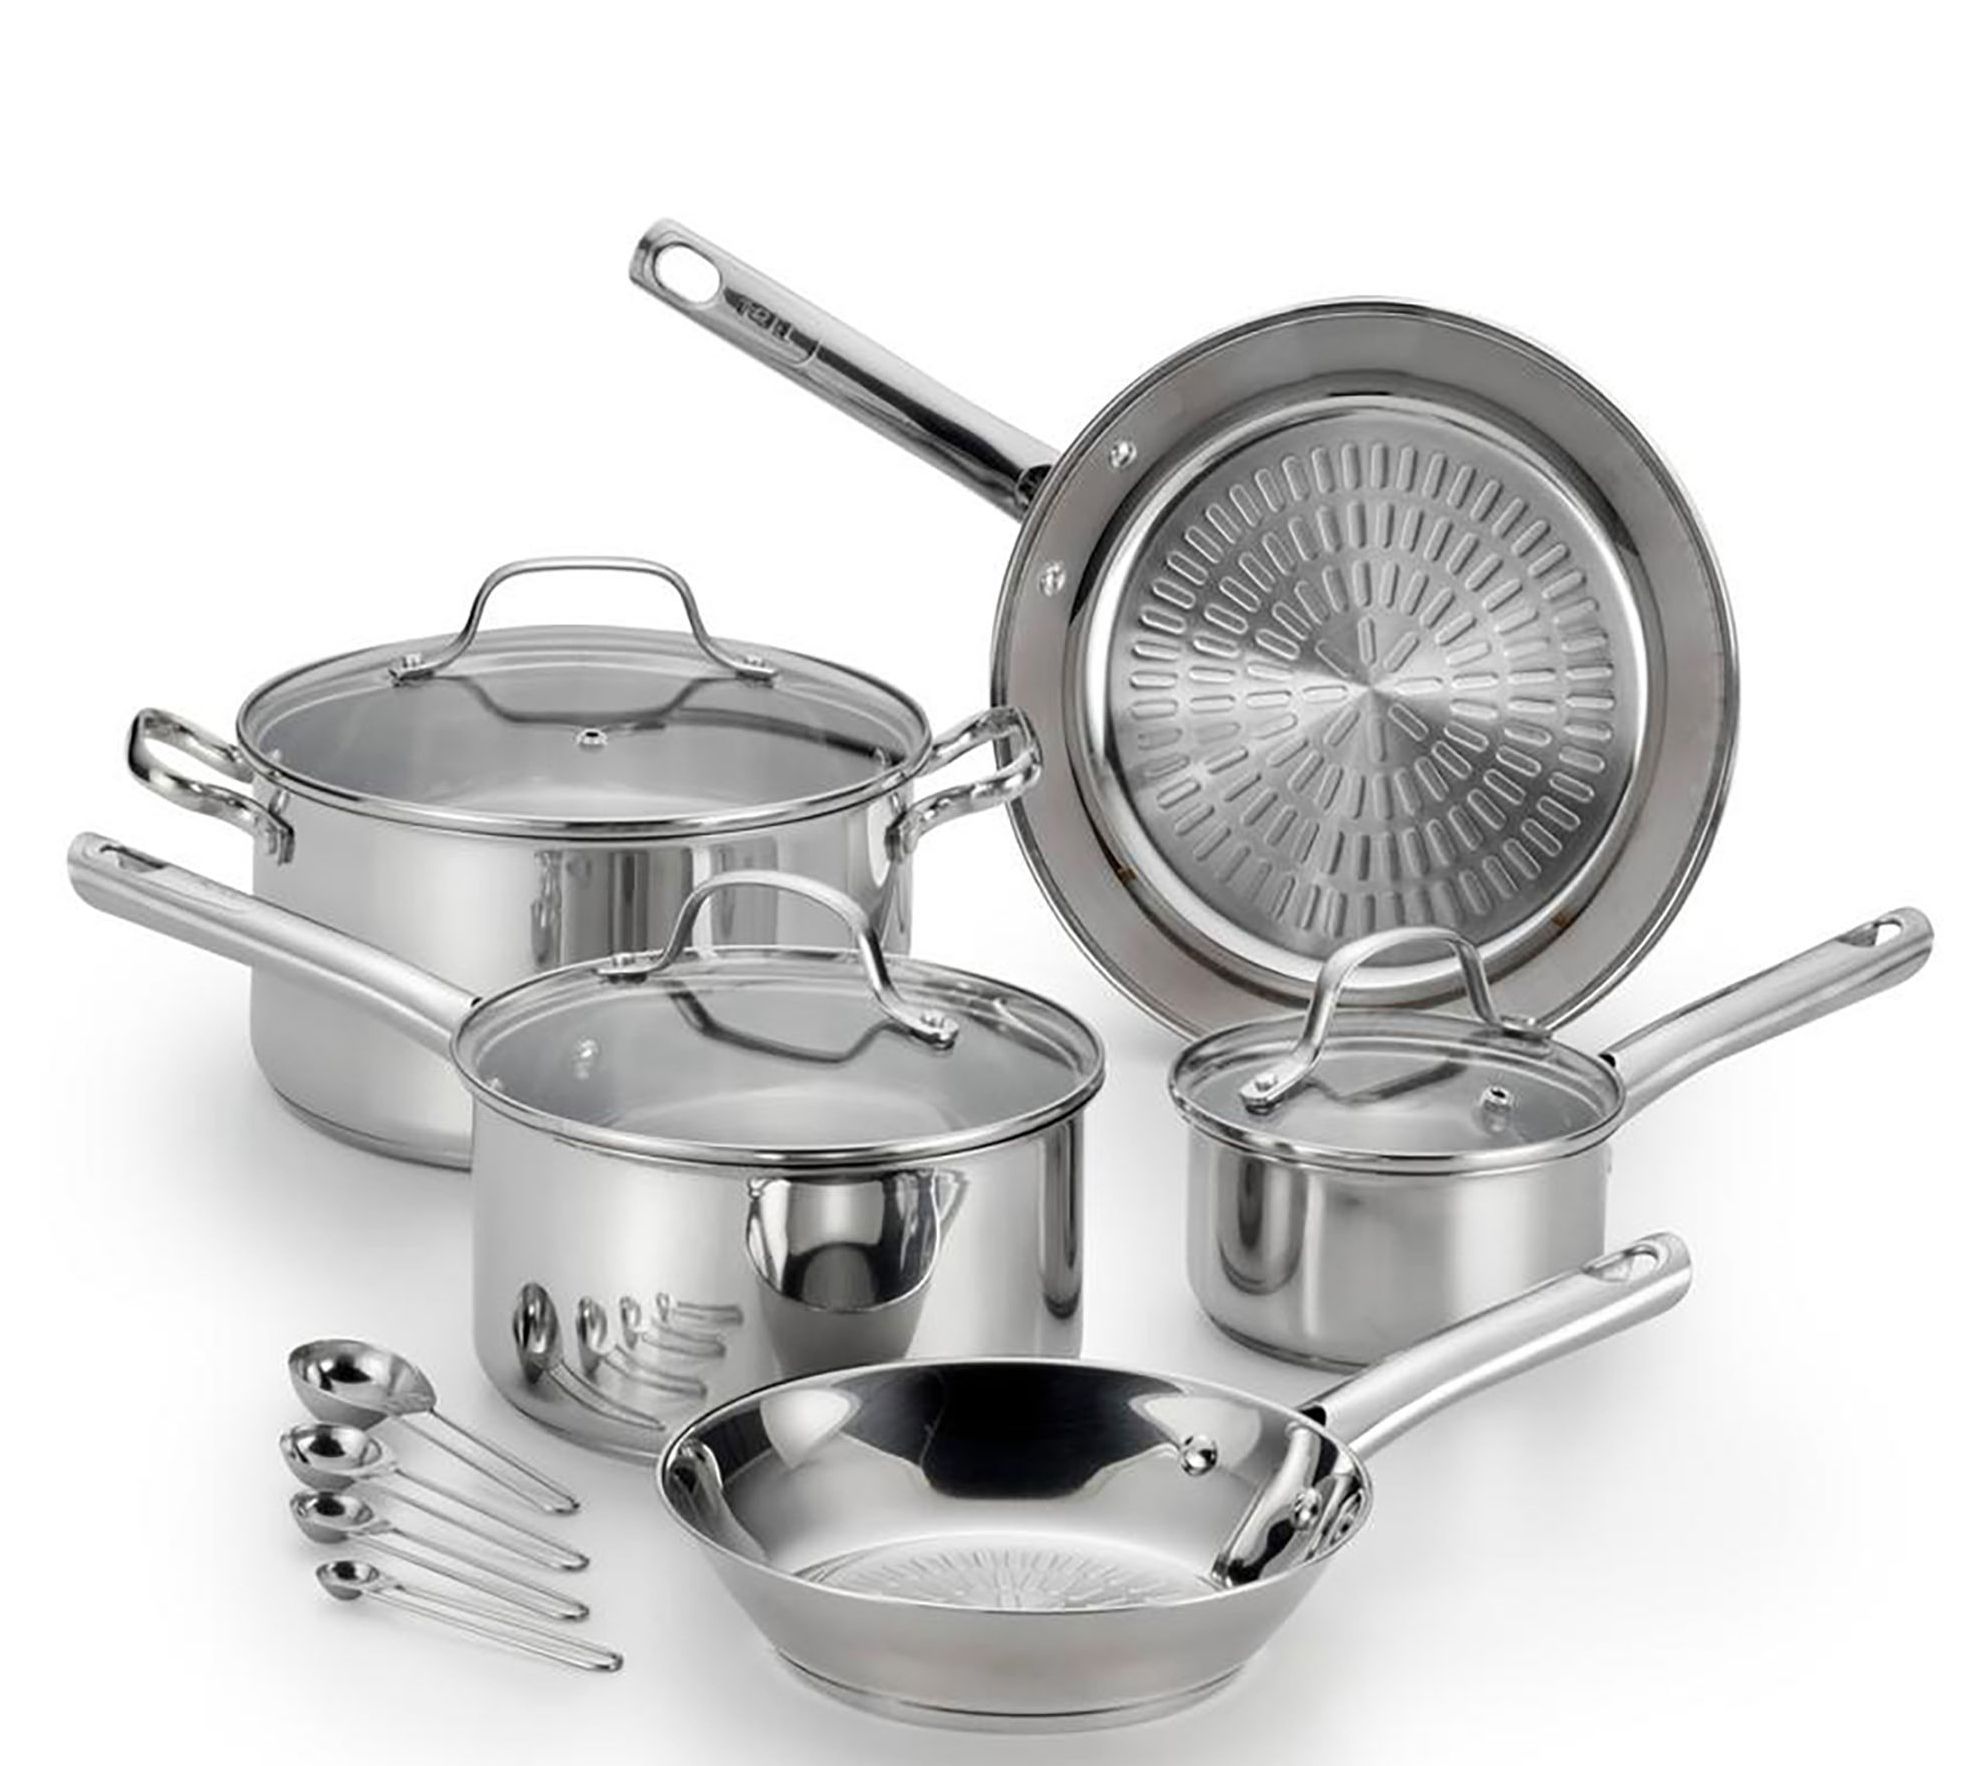 Gourmet by Bergner - 10 Piece Stainless Steel Cookware Set, Size 10, Silver